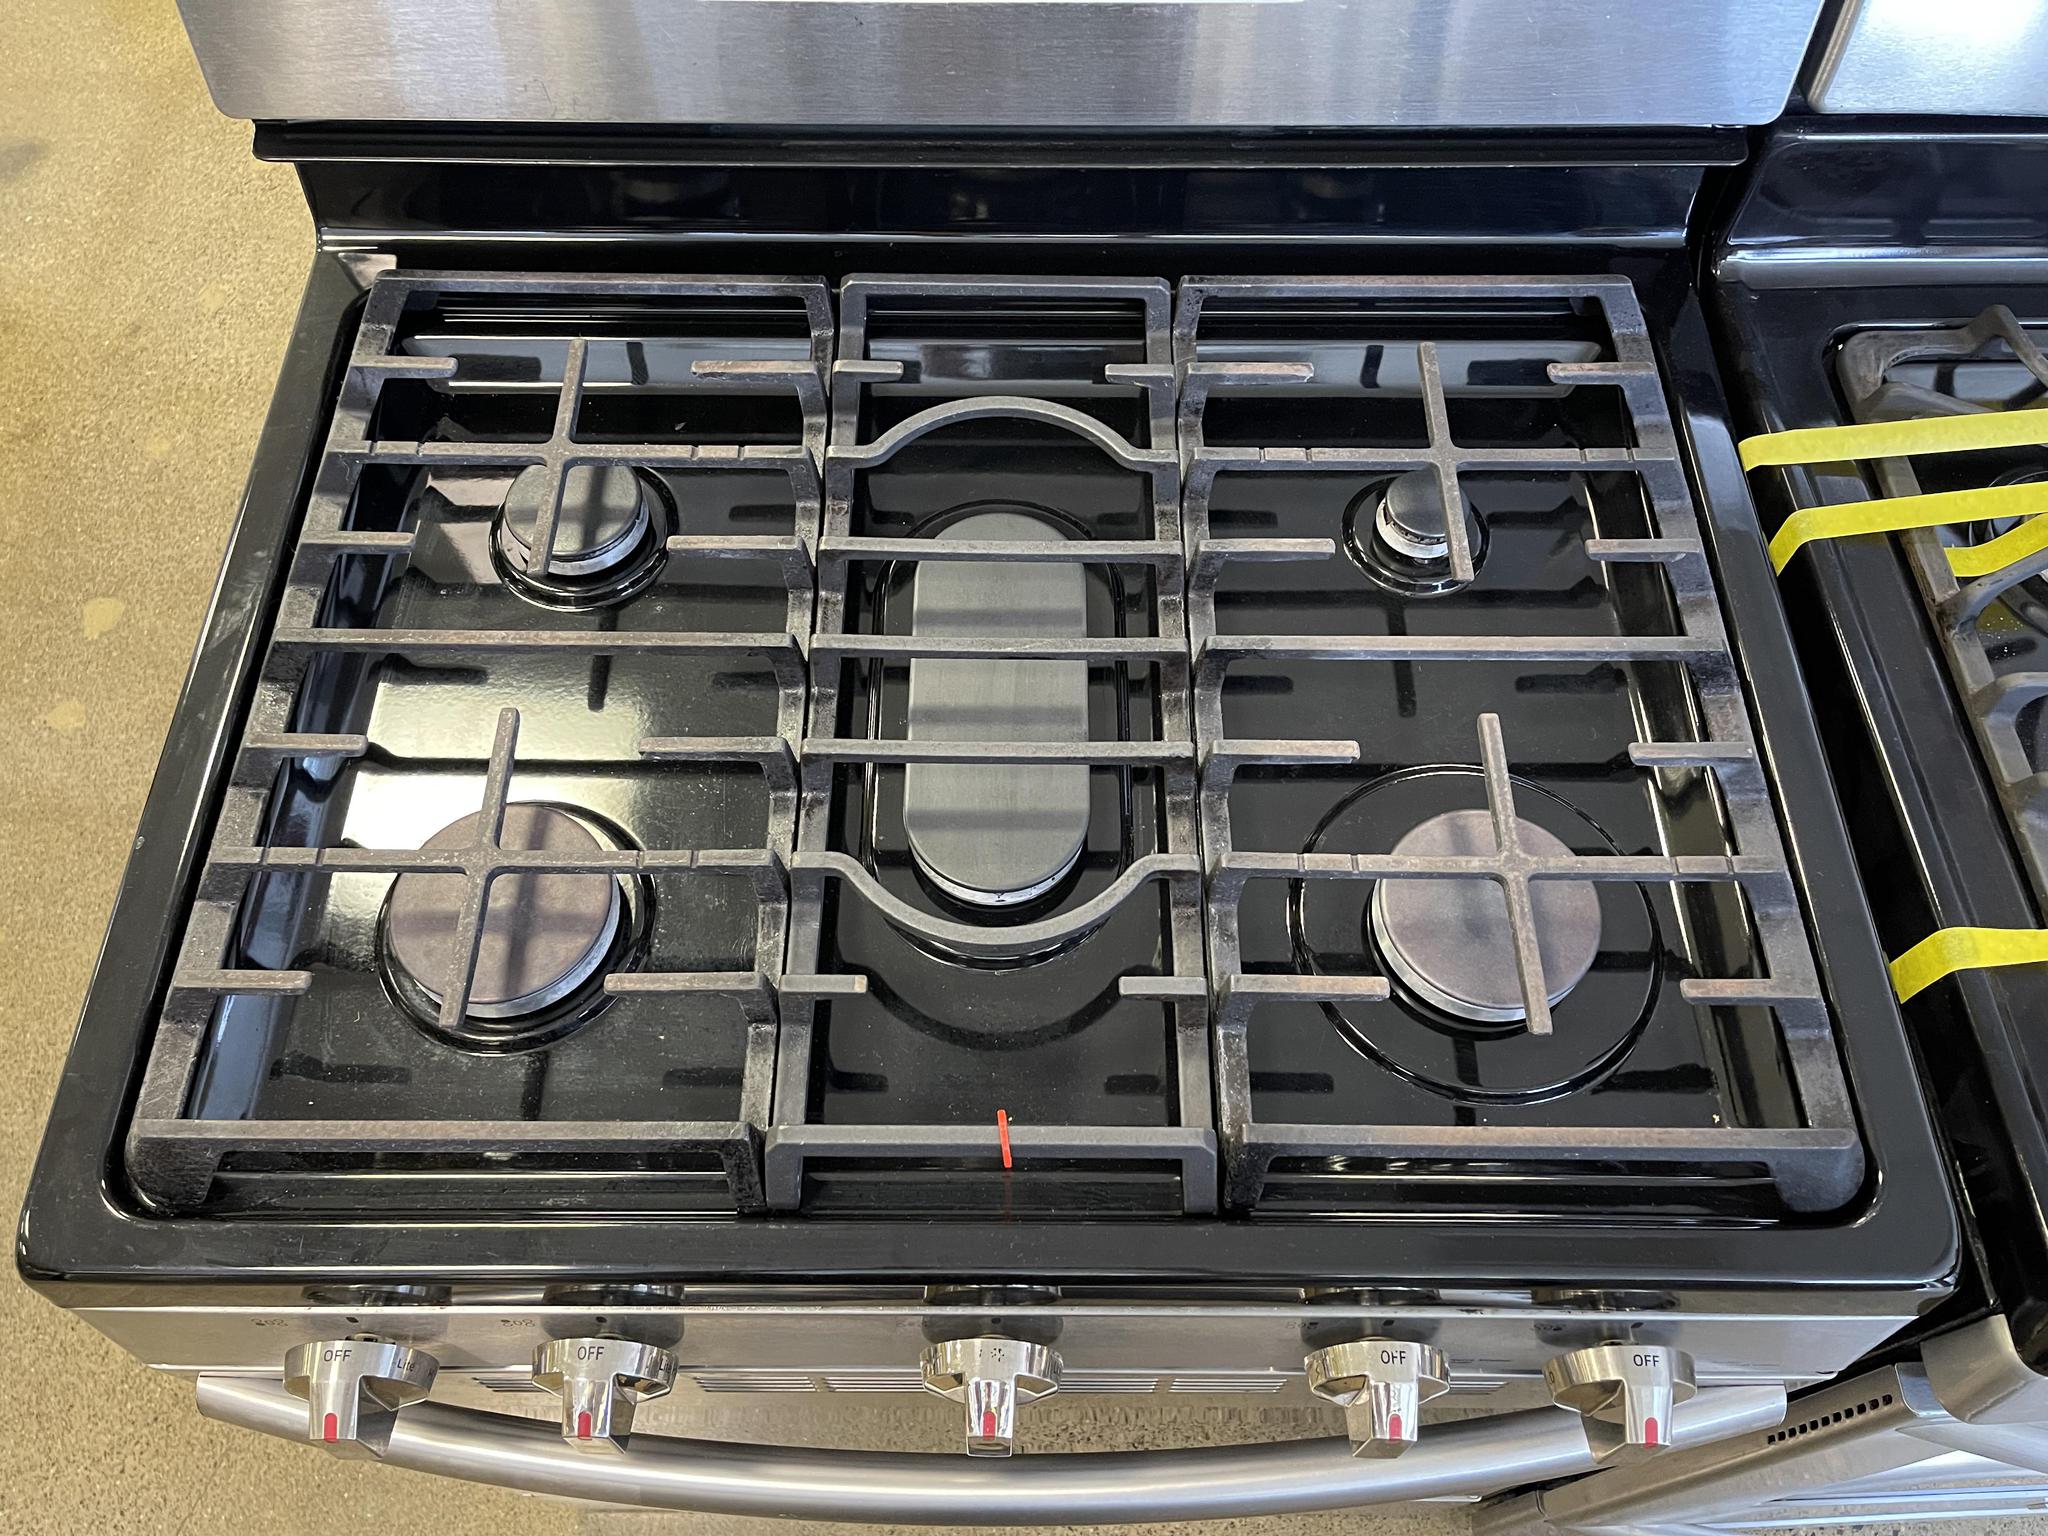 Samsung Stainless Gas Stove - 9585 – Shorties Appliances And More, LLC